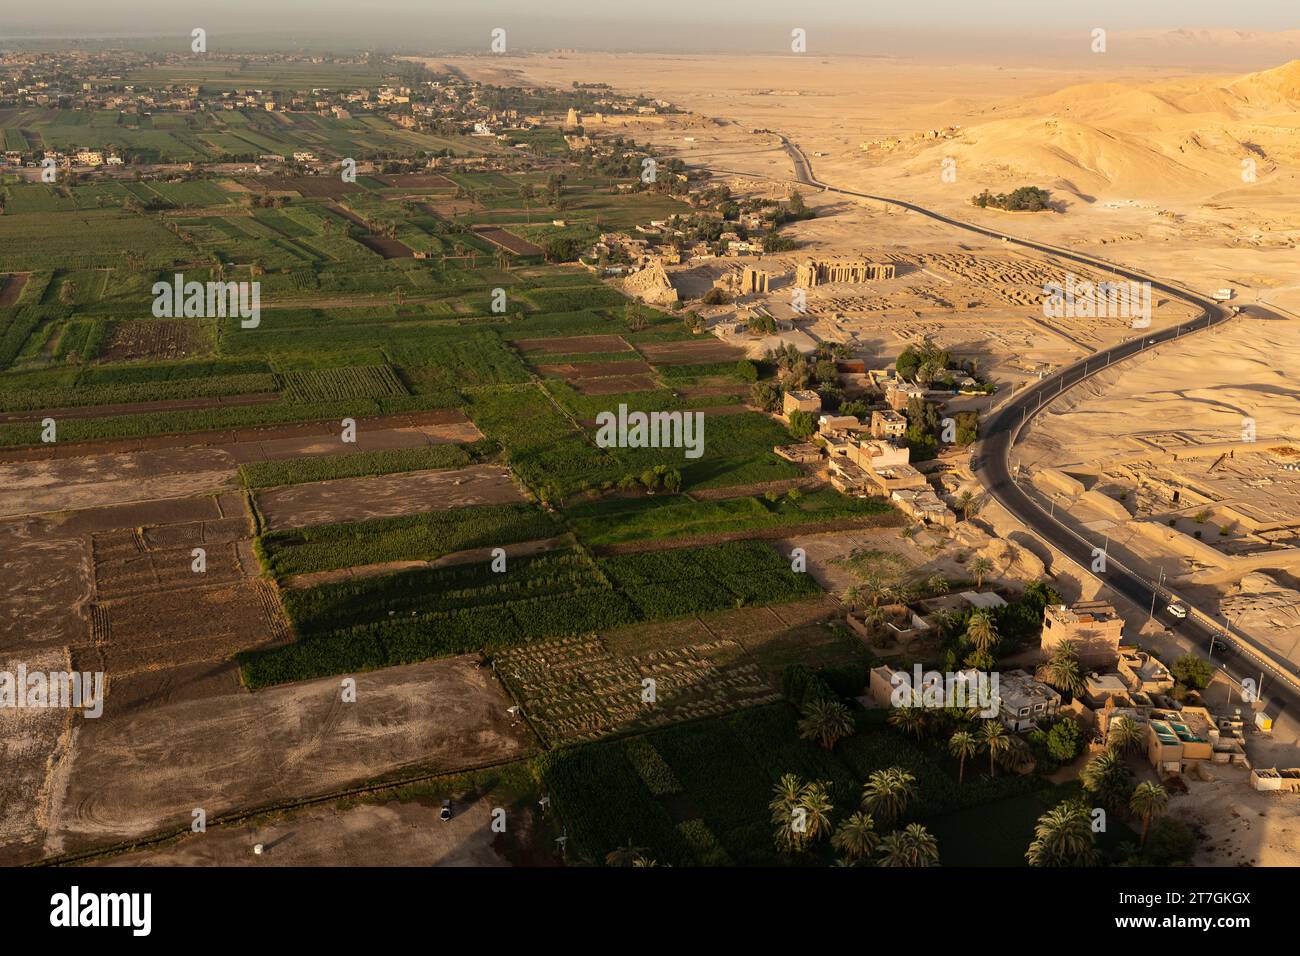 Aerial view of lush irrigated nile river valley meeting the dry arid desert sands and buried tombs of the pharos Stock Photo